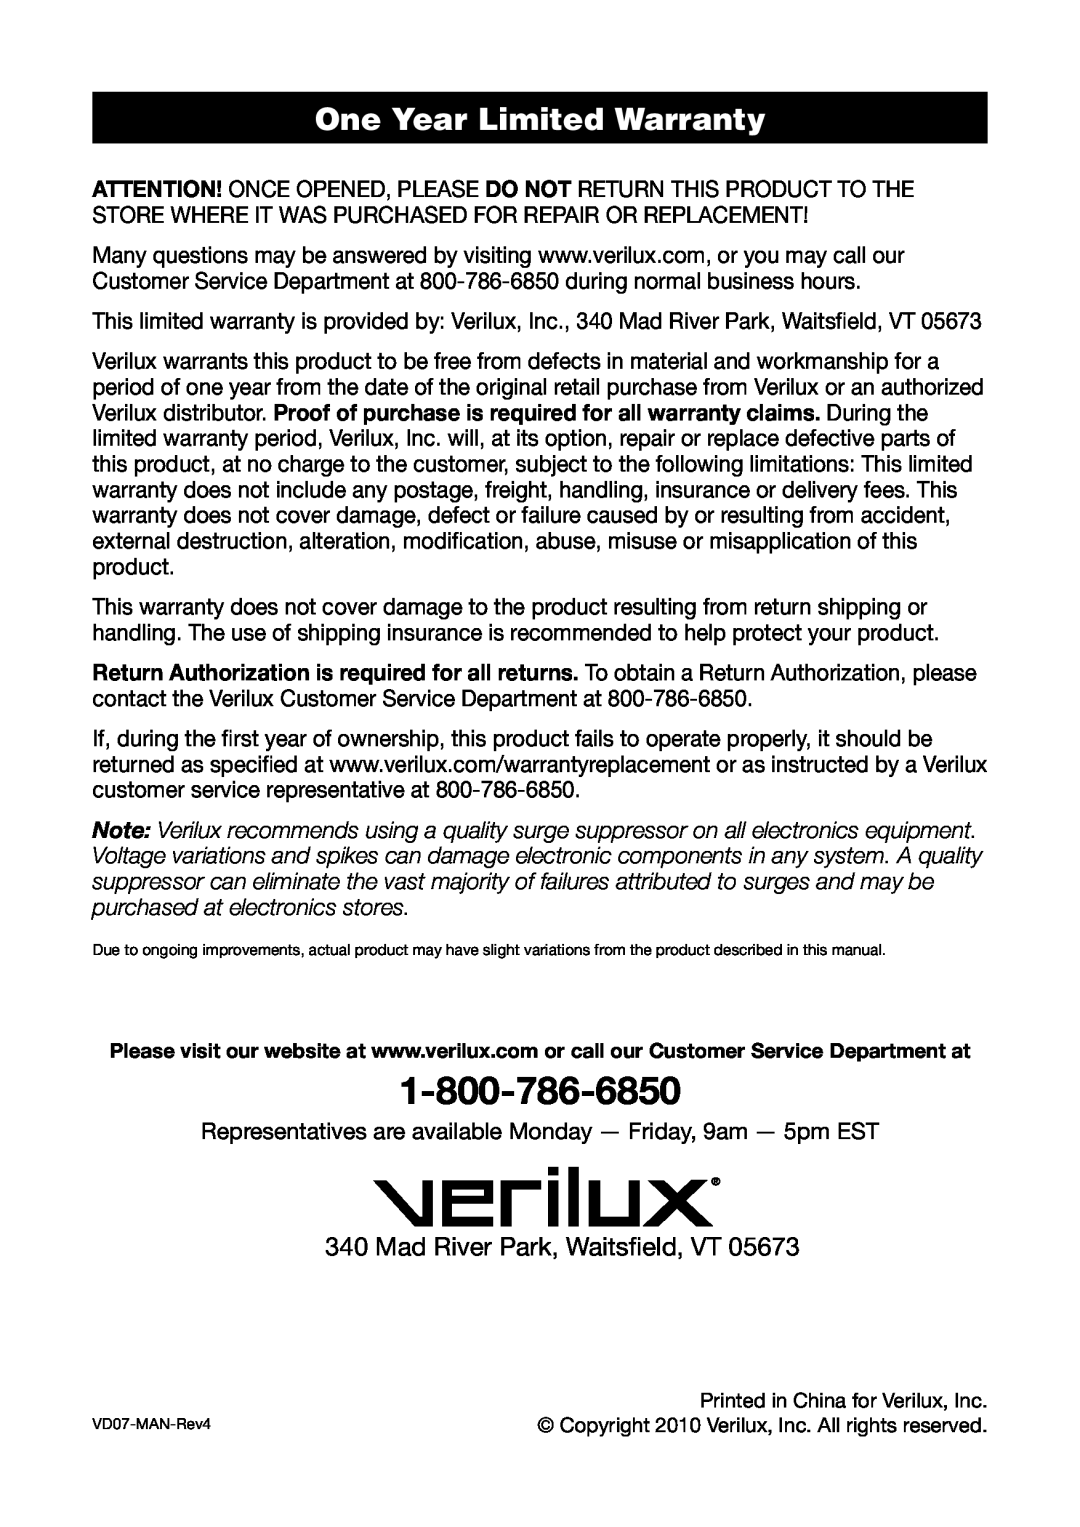 Verilux VD07 manual One Year Limited Warranty, Mad River Park, Waitsfield, VT 